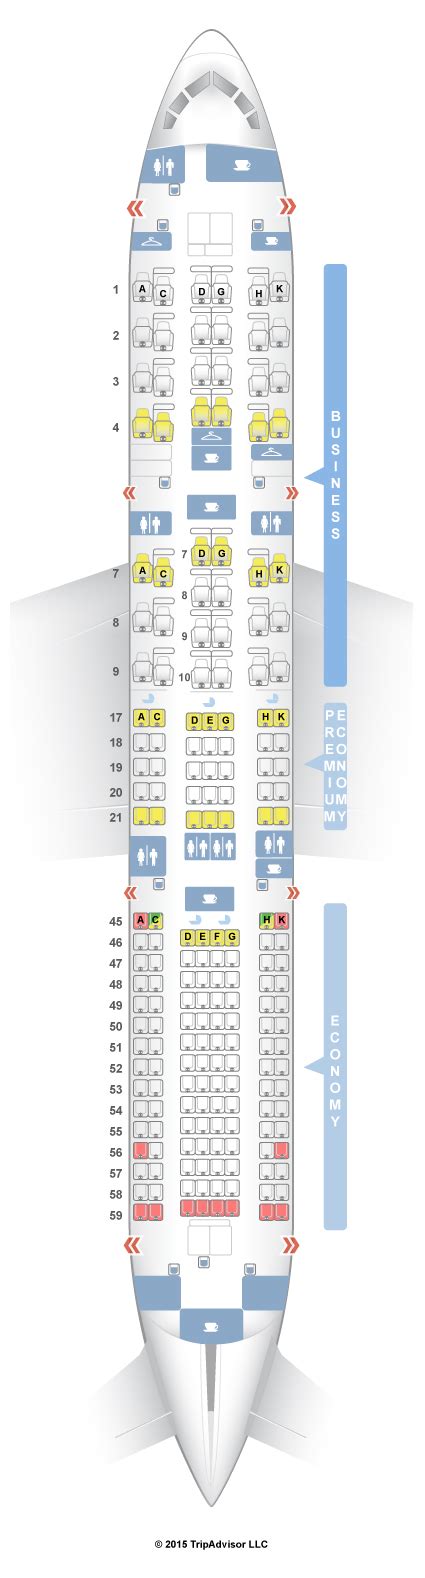 jal boeing 787-900 seat map